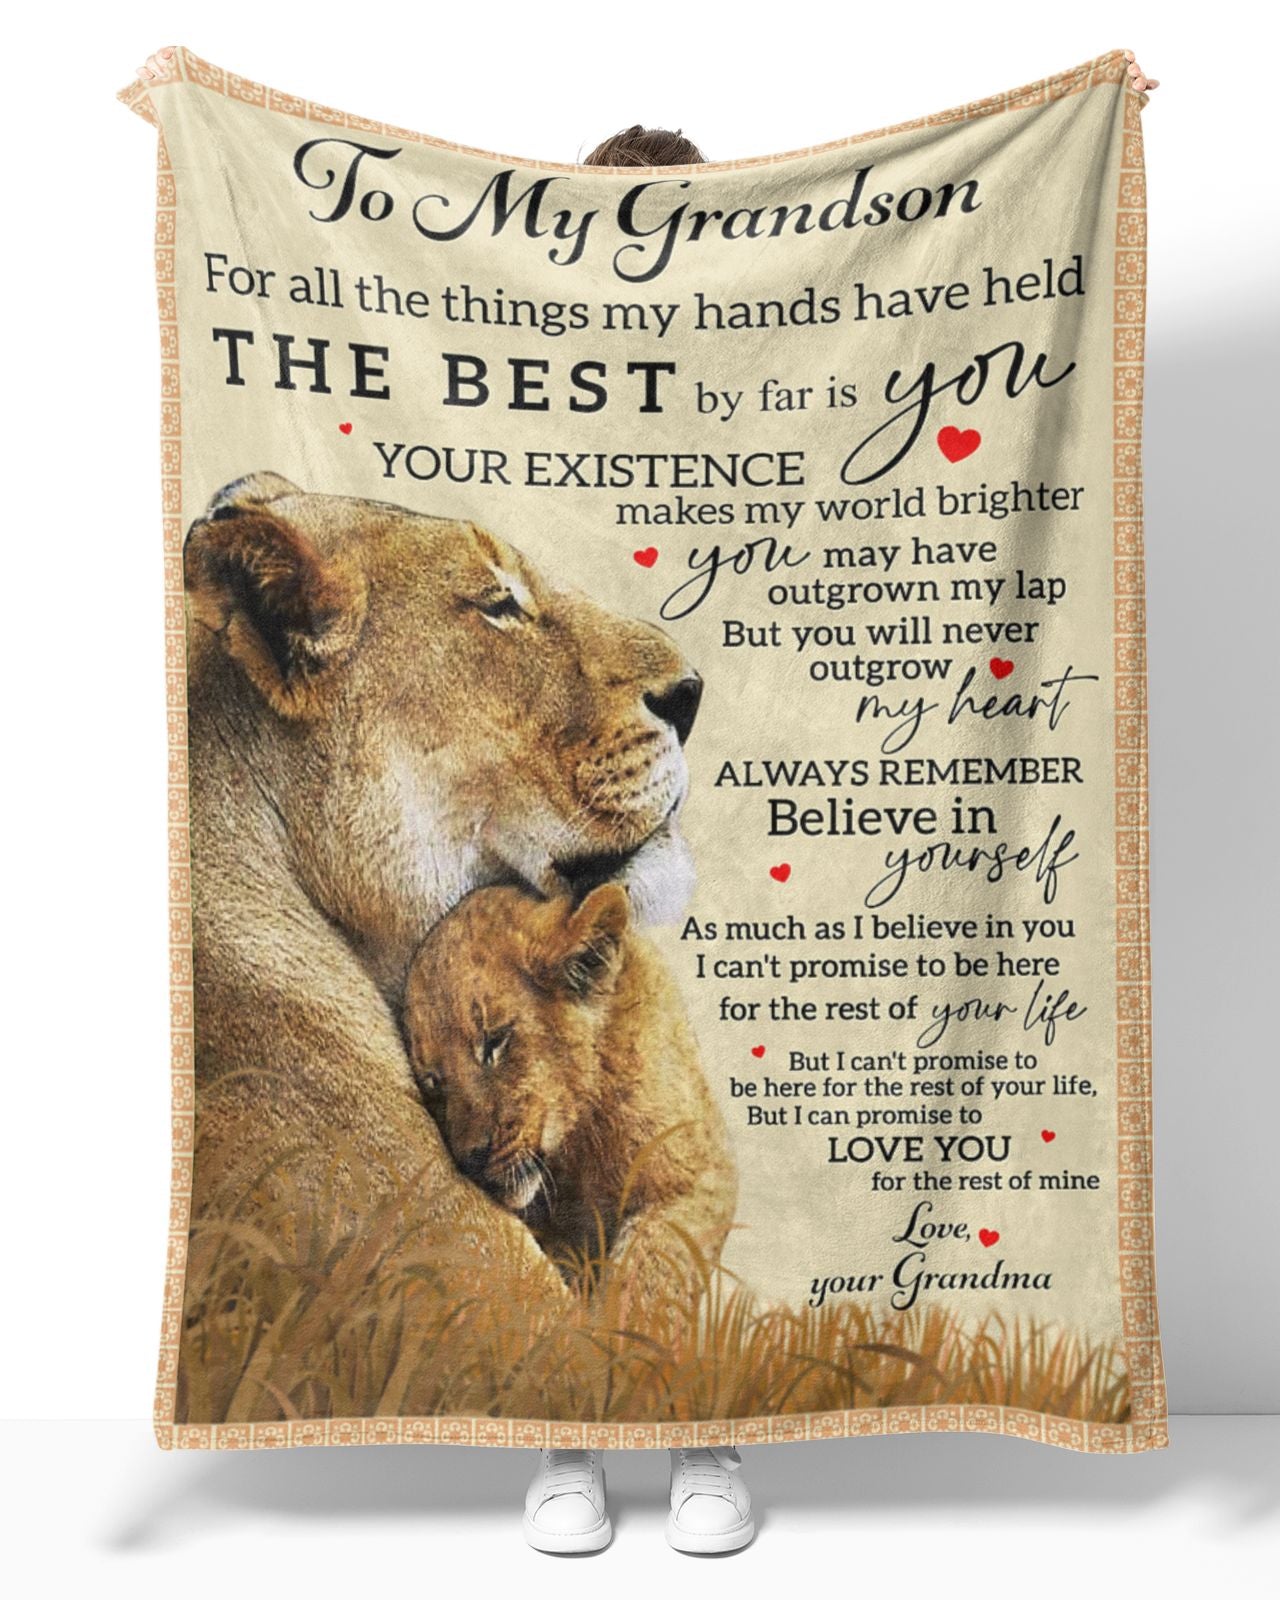 Personalized To My Grandson Lion Big Hug Blanket From Grandma, To My Grandson For All The Things My Hands Have Held Lion Blanket Gifts For Grandson.